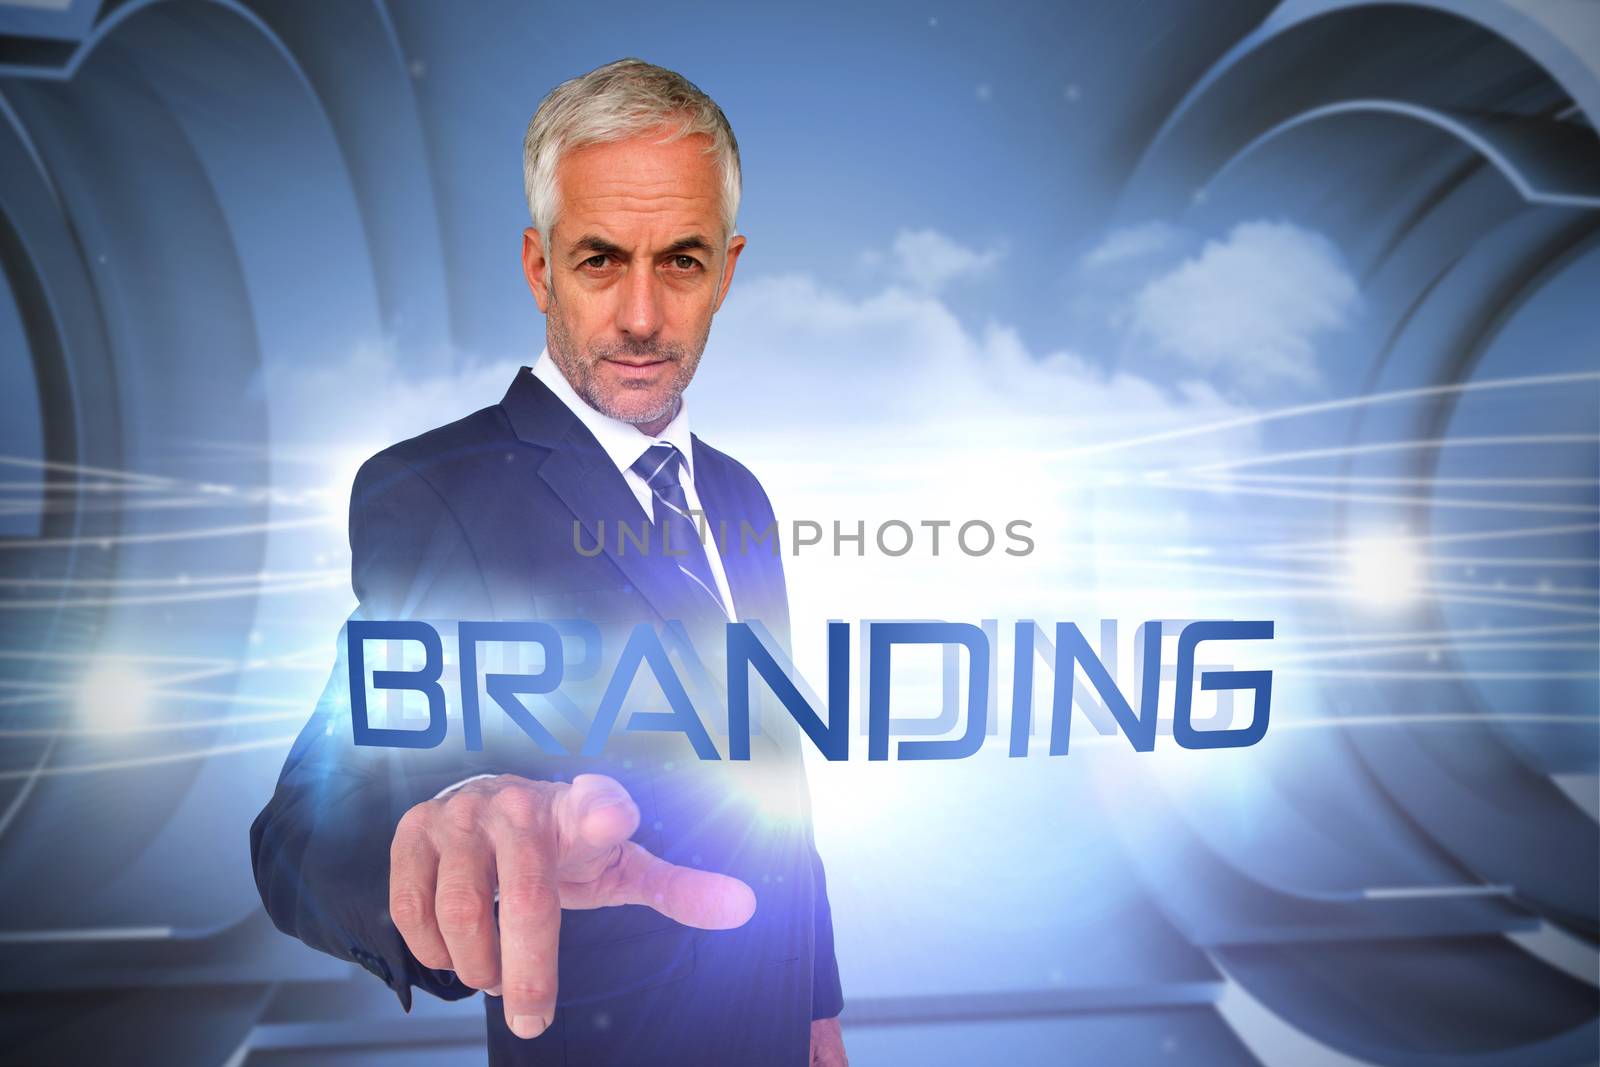 The word branding and businessman pointing against abstract white cloud design